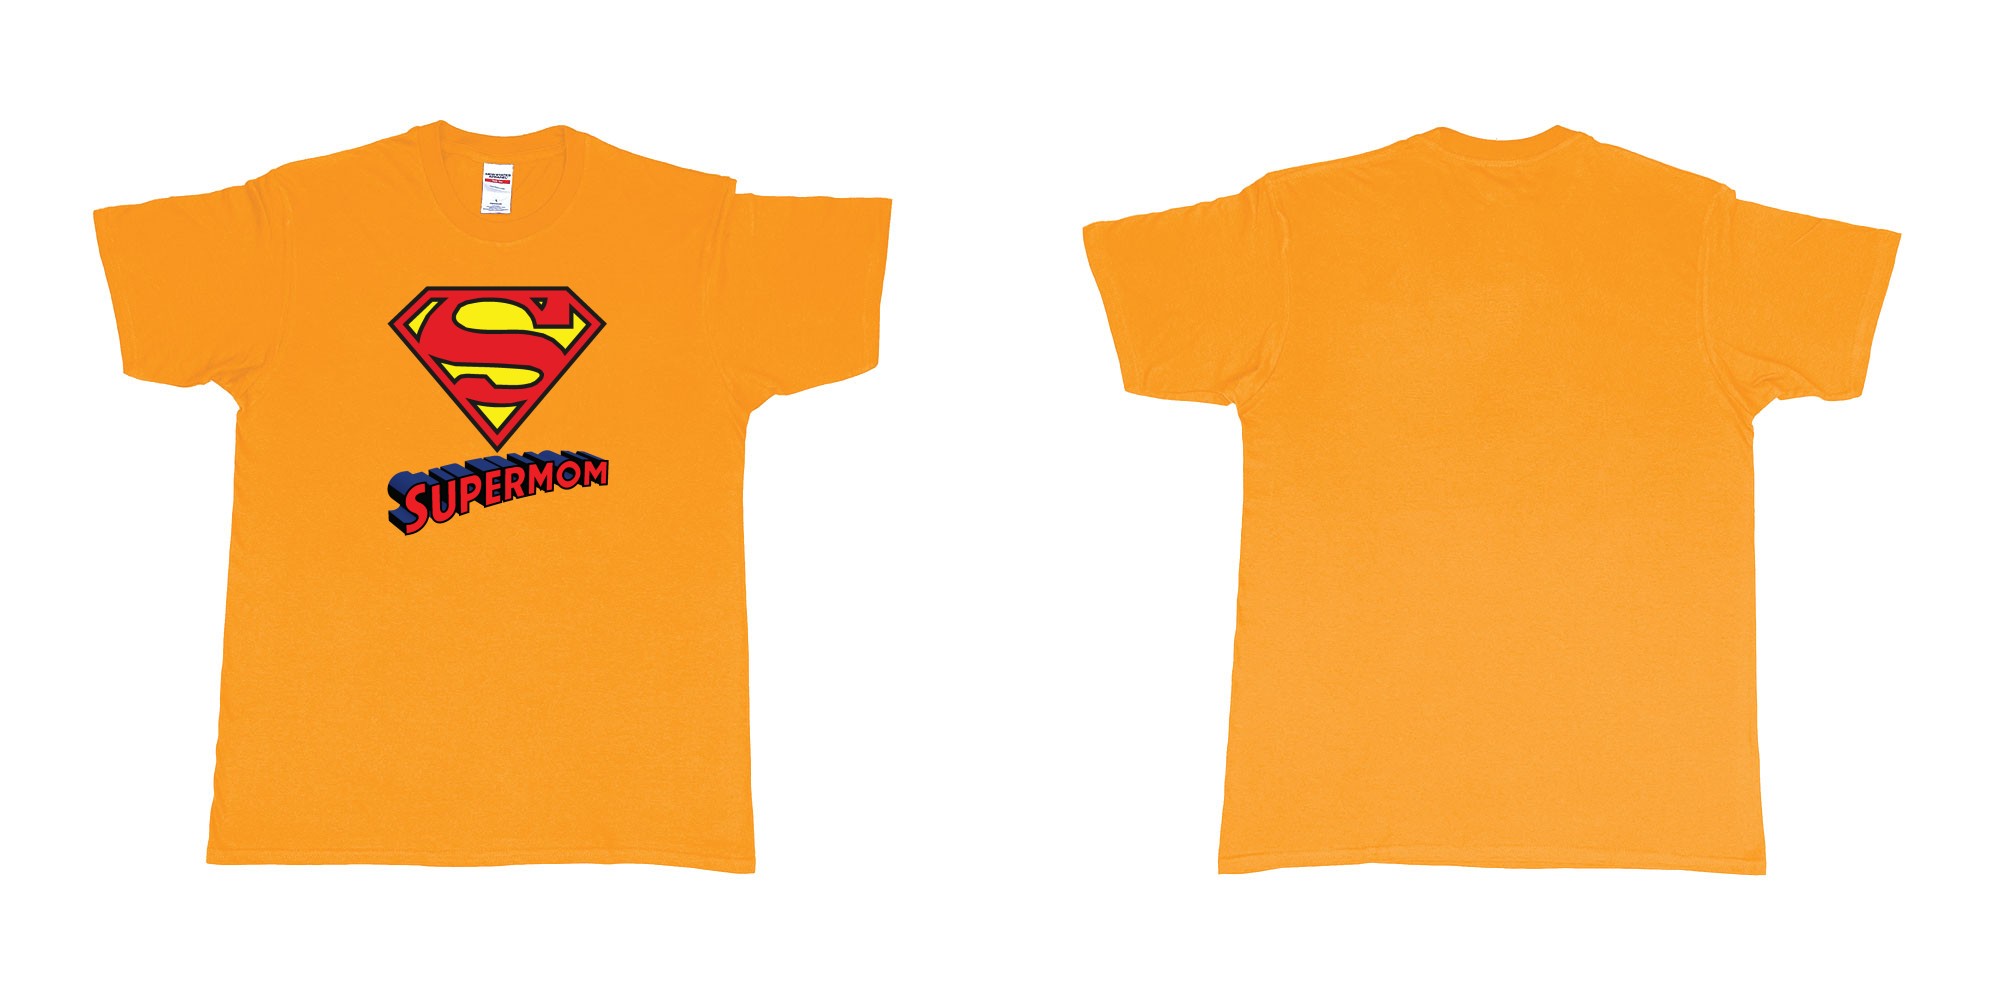 Custom tshirt design superman logo with own custom text print bali in fabric color gold choice your own text made in Bali by The Pirate Way